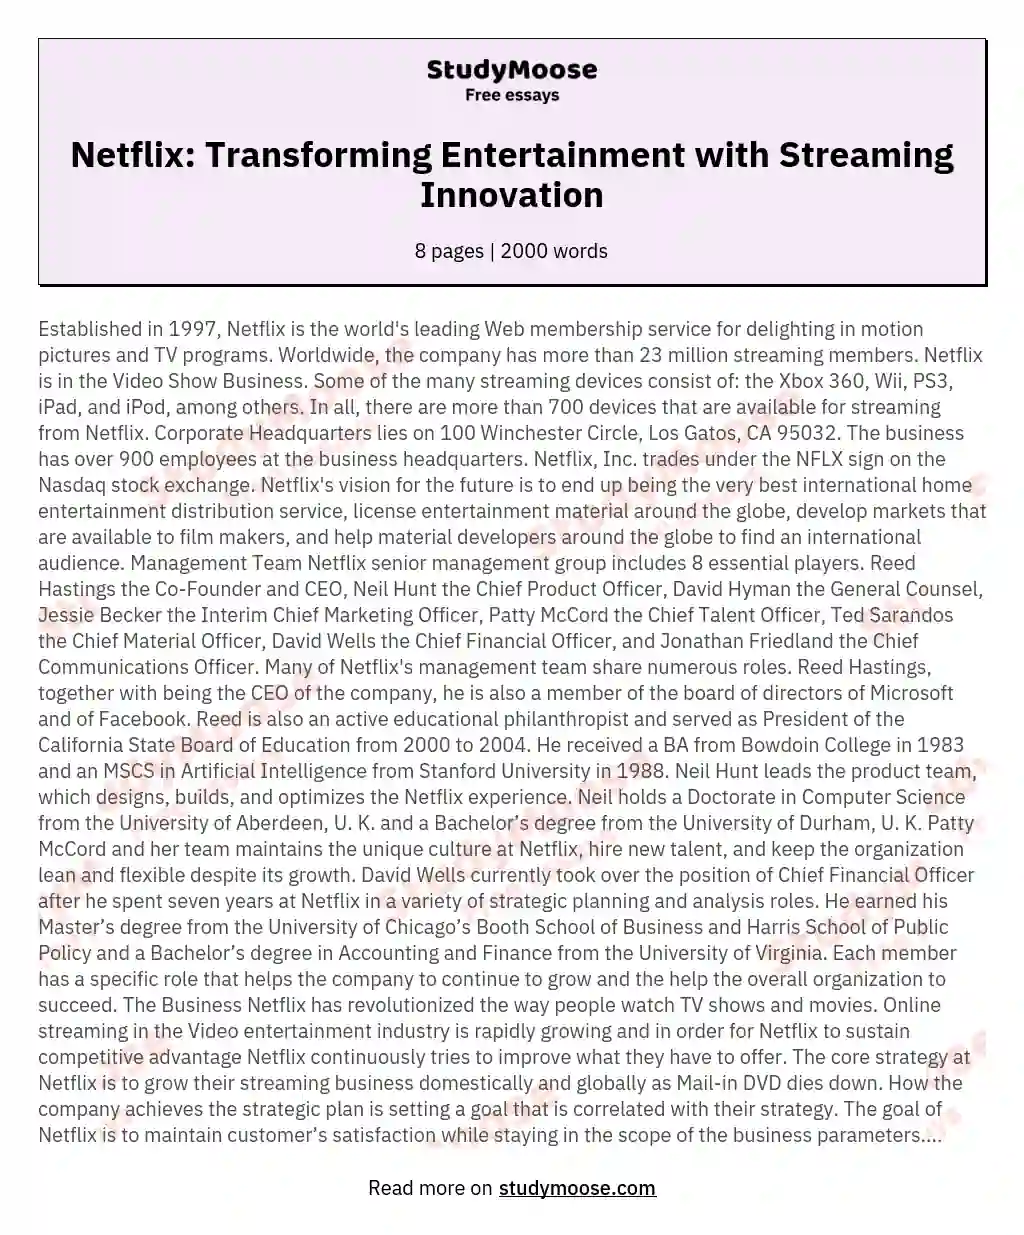 Netflix: Transforming Entertainment with Streaming Innovation essay